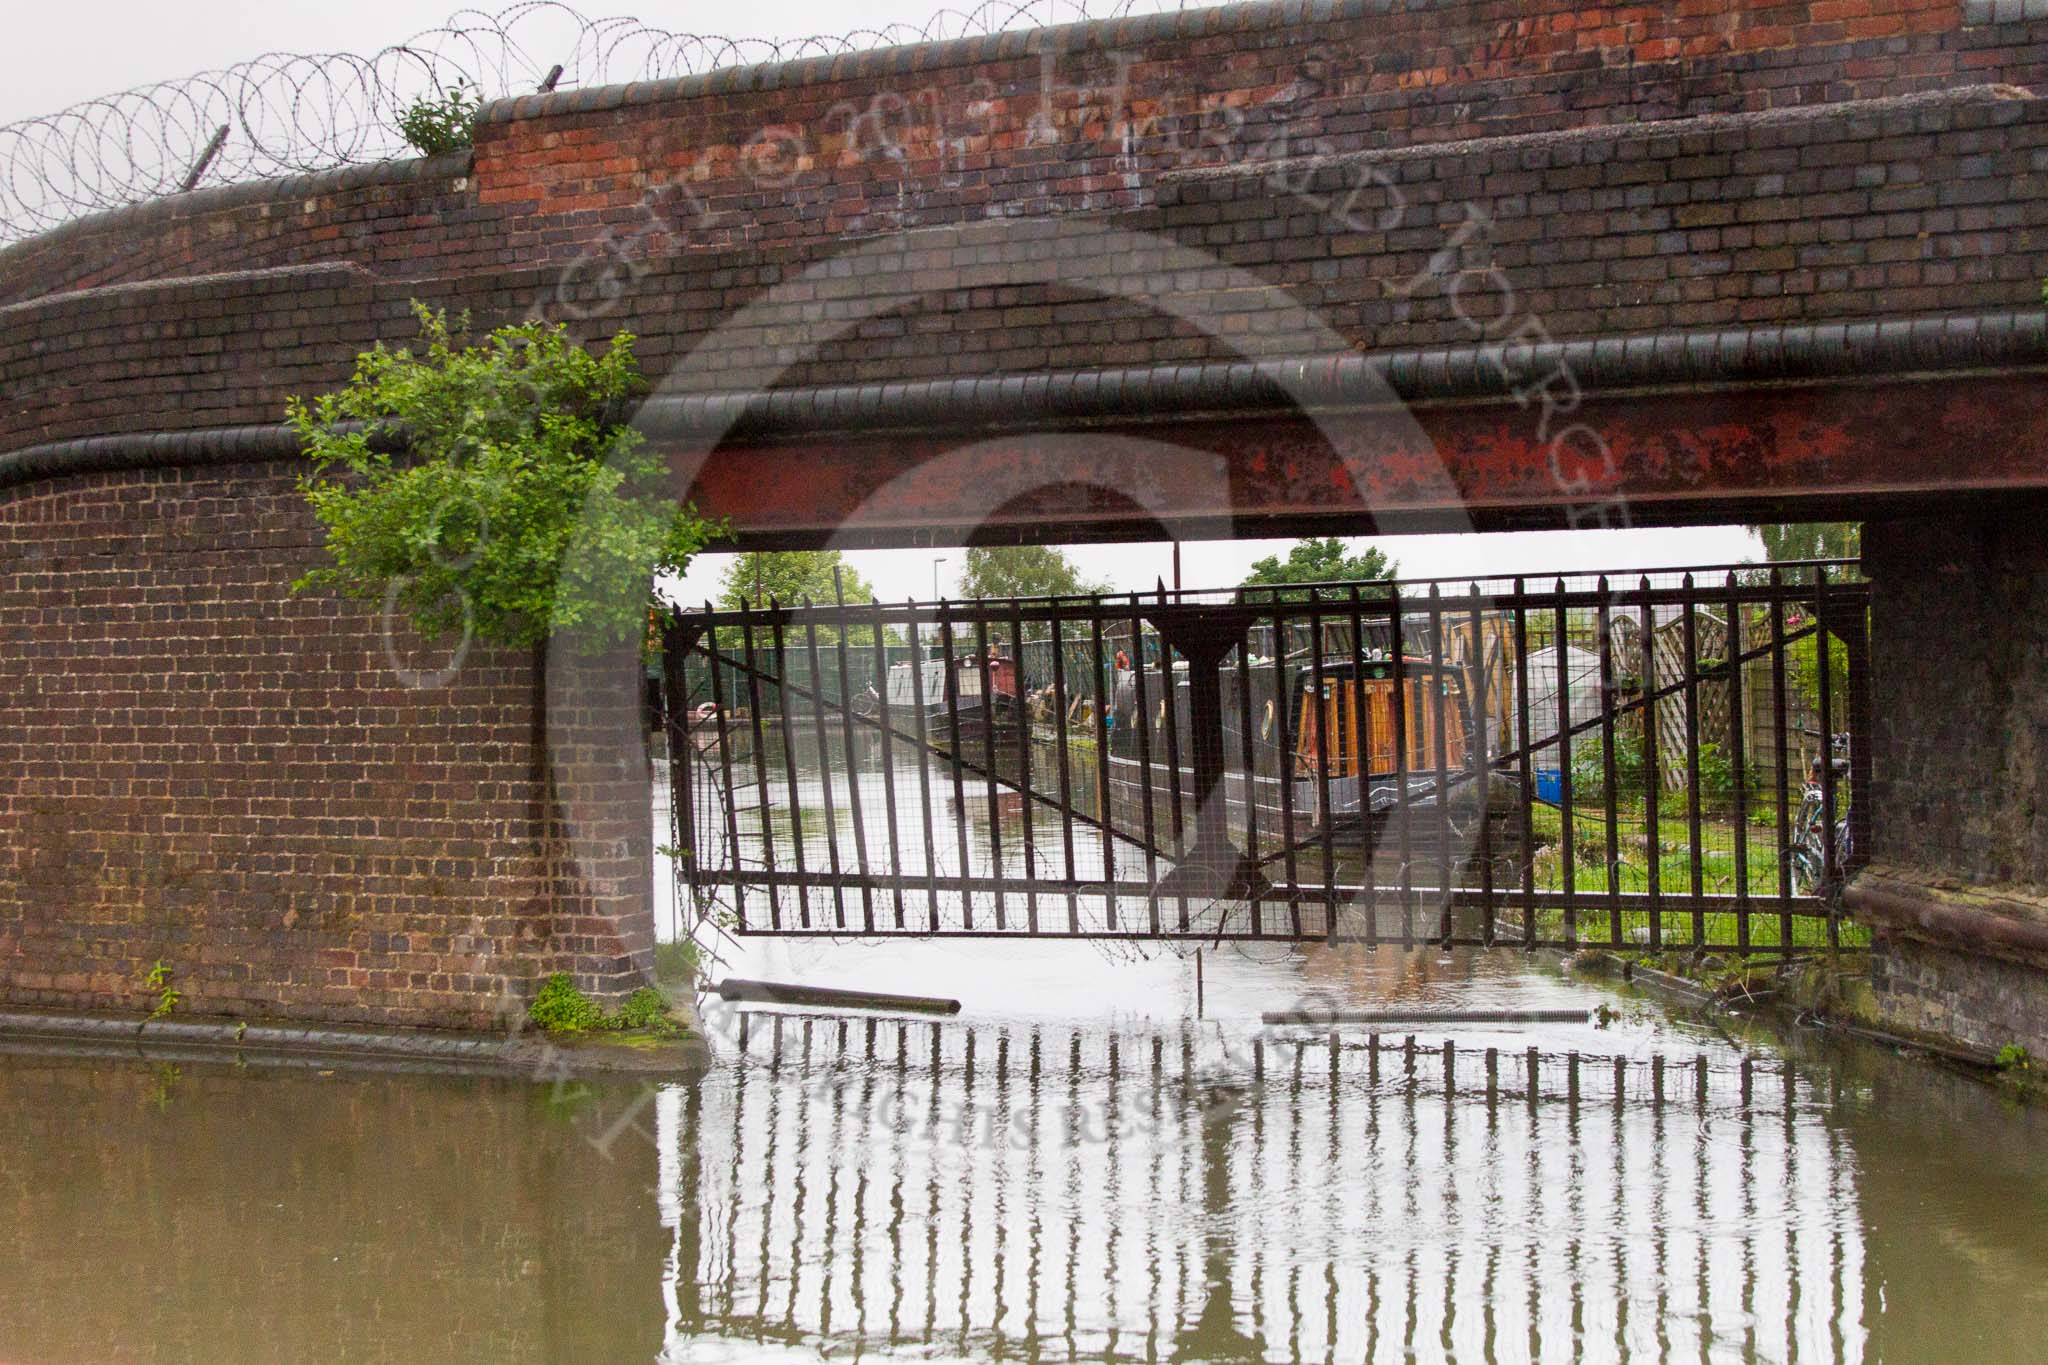 BCN Marathon Challenge 2014: Bridge on the Dudley No 1 Canal leading to a Shropshire Union basin with an old warehouse and stables carrying an LMS advertisment.
Birmingham Canal Navigation,


United Kingdom,
on 25 May 2014 at 06:55, image #213